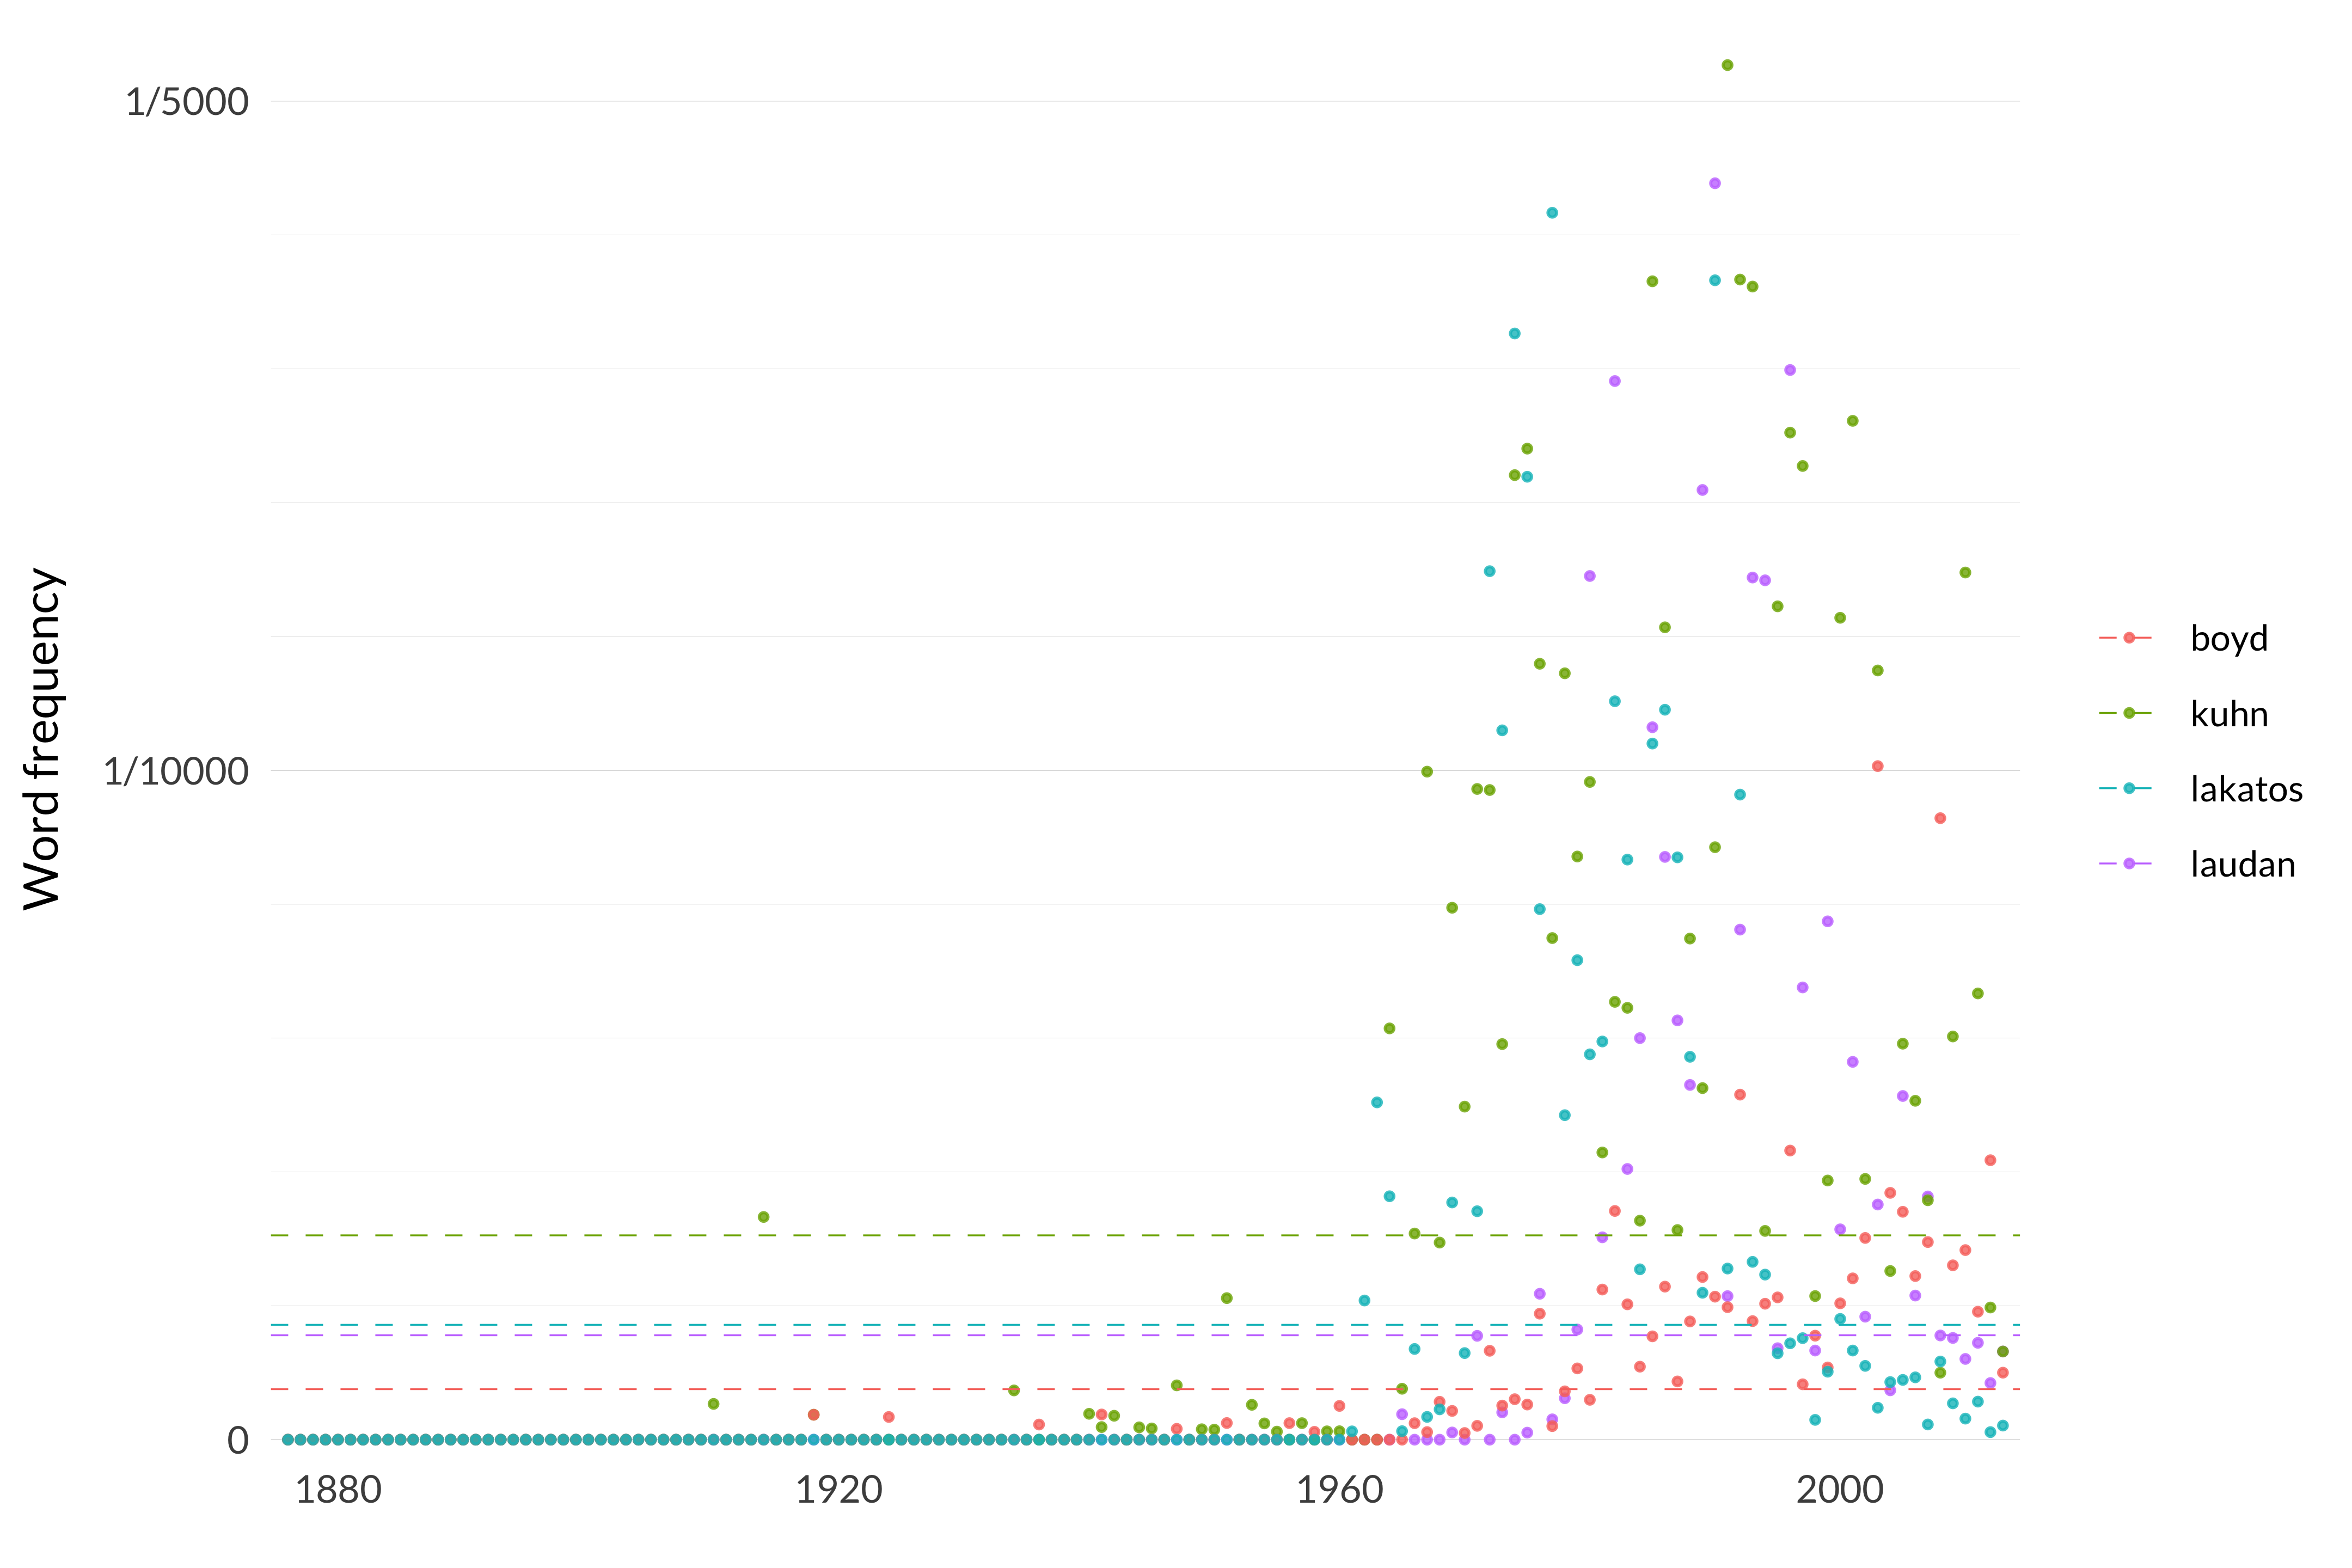 A scatterplot showing the frequency of the words laudan, kuhn, boyd, lakatos. The word laudan appears, on average across the years, 16 times per million words, and in the median year, it appears 0 times per million words. Its most frequent occurrence is in 1990 when it appears 188 times per million words, and its least frequent occurrence is in 1876 when it appears 0 times per million words. The word kuhn appears, on average across the years, 31 times per million words, and in the median year, it appears 0 times per million words. Its most frequent occurrence is in 1991 when it appears 205 times per million words, and its least frequent occurrence is in 1876 when it appears 0 times per million words. The word boyd appears, on average across the years, 8 times per million words, and in the median year, it appears 0 times per million words. Its most frequent occurrence is in 2003 when it appears 101 times per million words, and its least frequent occurrence is in 1876 when it appears 0 times per million words. The word lakatos appears, on average across the years, 17 times per million words, and in the median year, it appears 0 times per million words. Its most frequent occurrence is in 1977 when it appears 183 times per million words, and its least frequent occurrence is in 1876 when it appears 0 times per million words. 